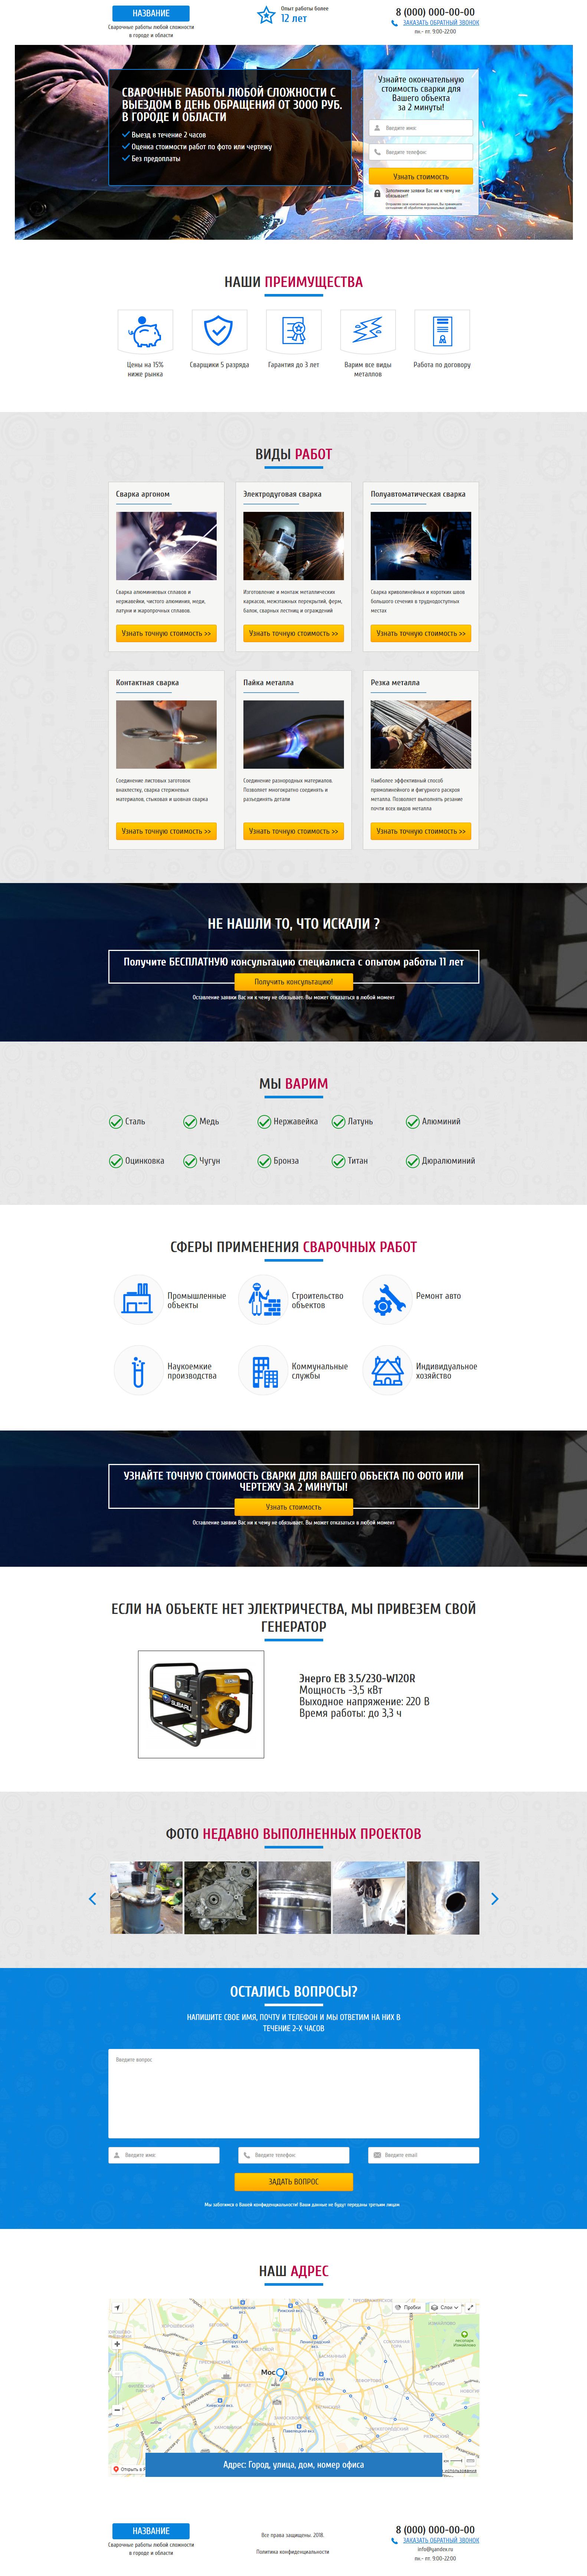 Landing page - All types of welding